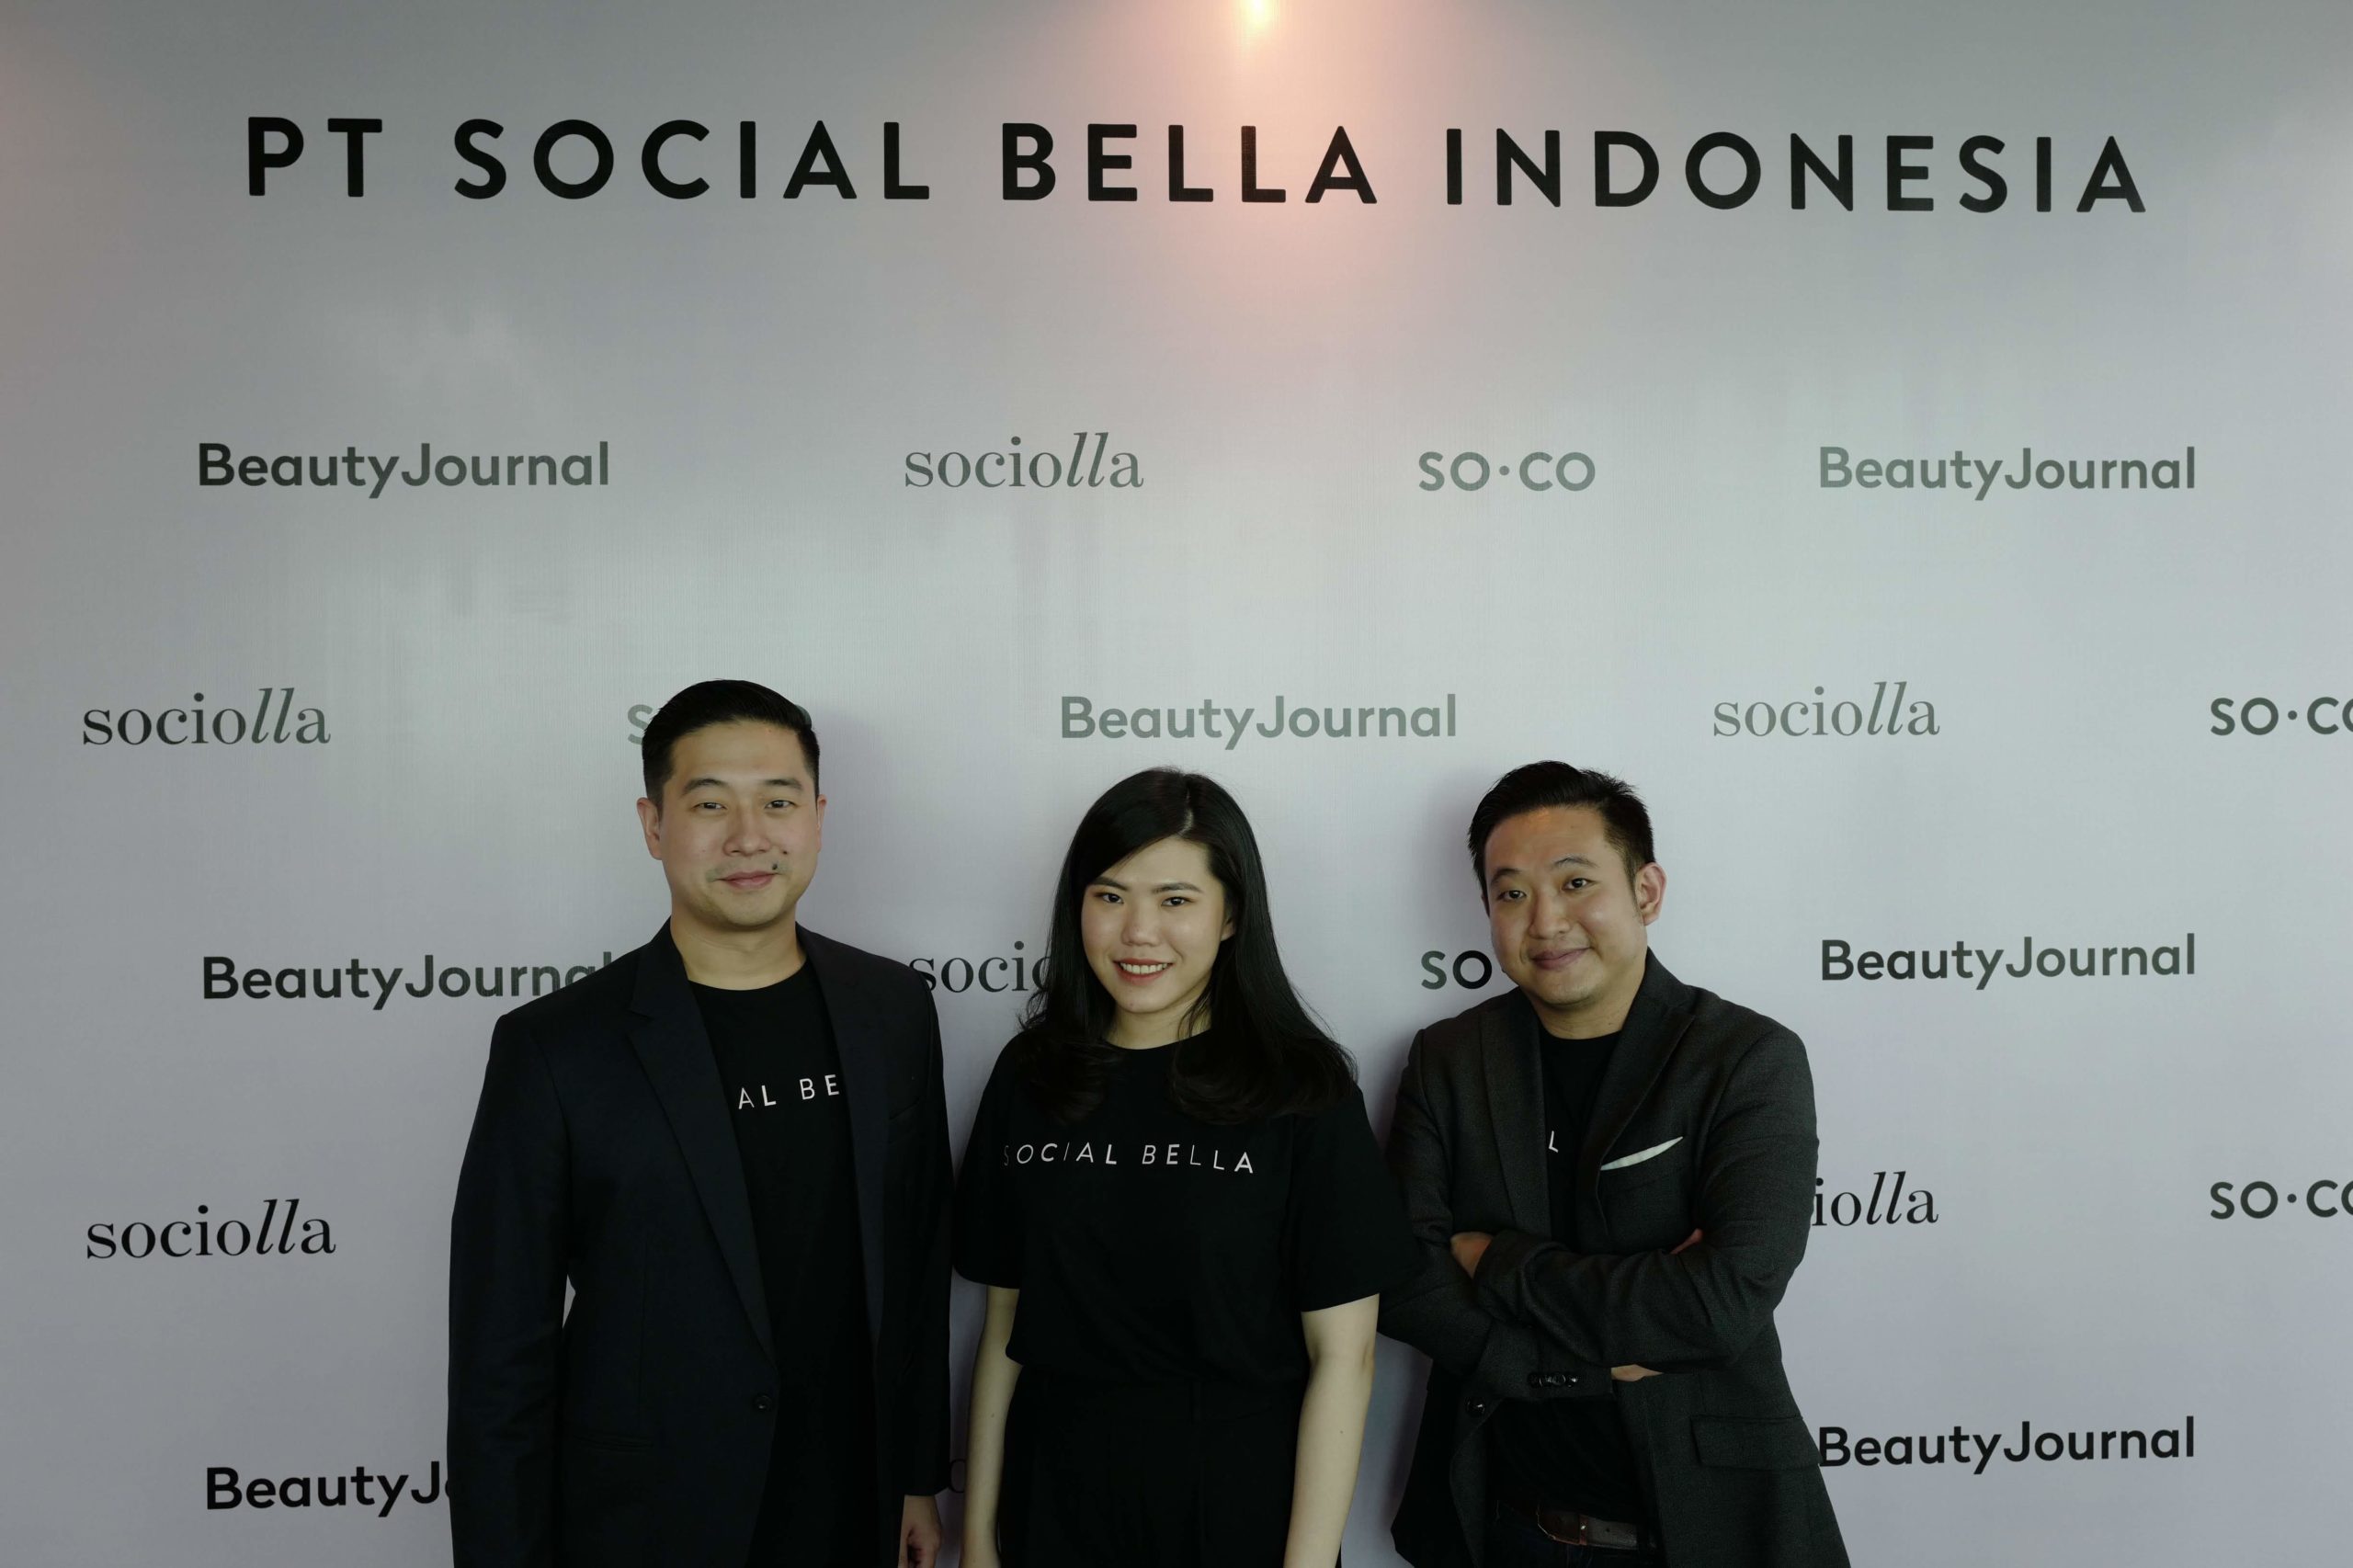 Indonesian beauty platform Social Bella said to be in talks to raise $75m